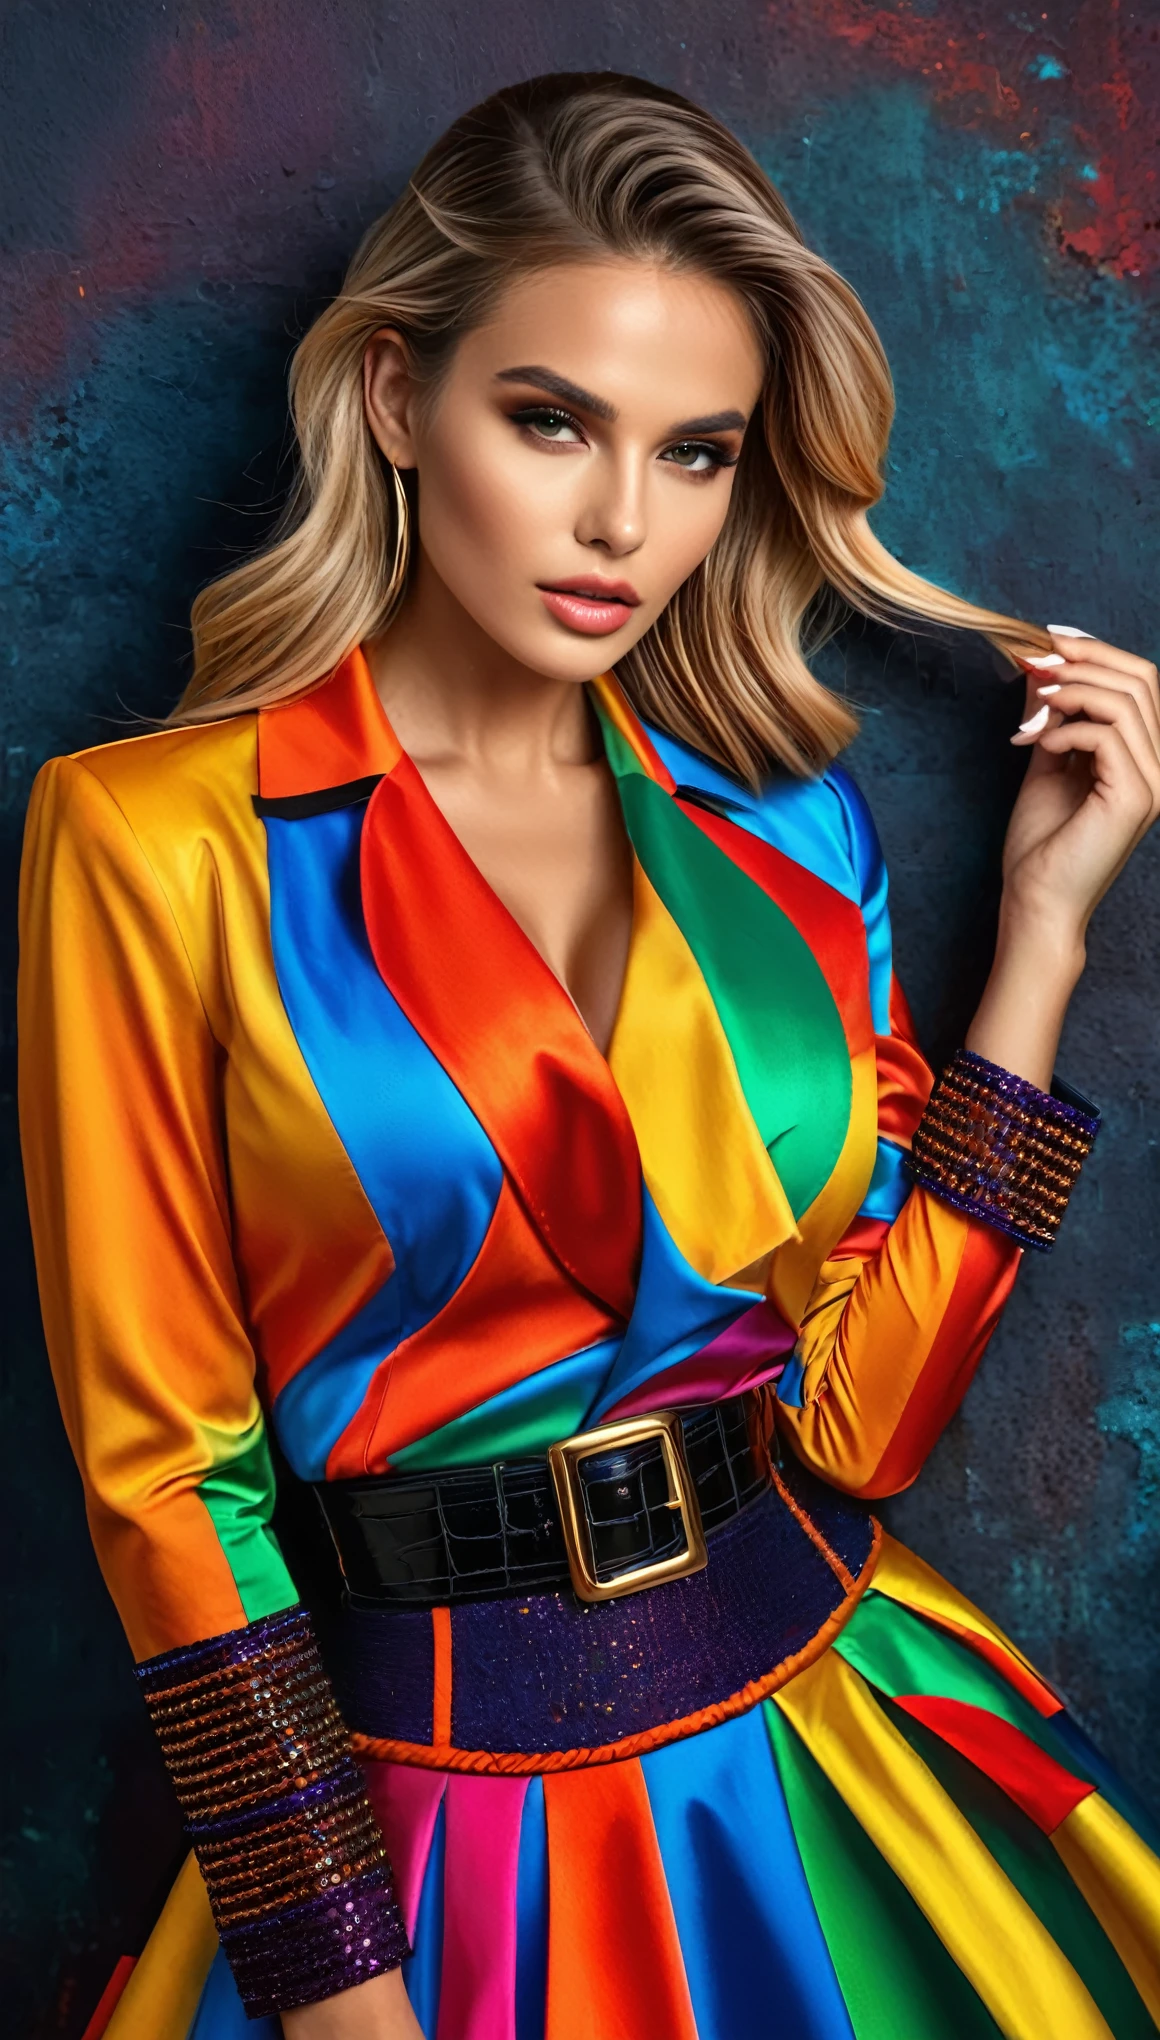 Award-winning photo by slim Aaons of Beautiful Instagram model, dressed in fashion, sharp, magic realism. Perfect realistic skin and hands. Ultra realistic photo, vibrant colors, 8k